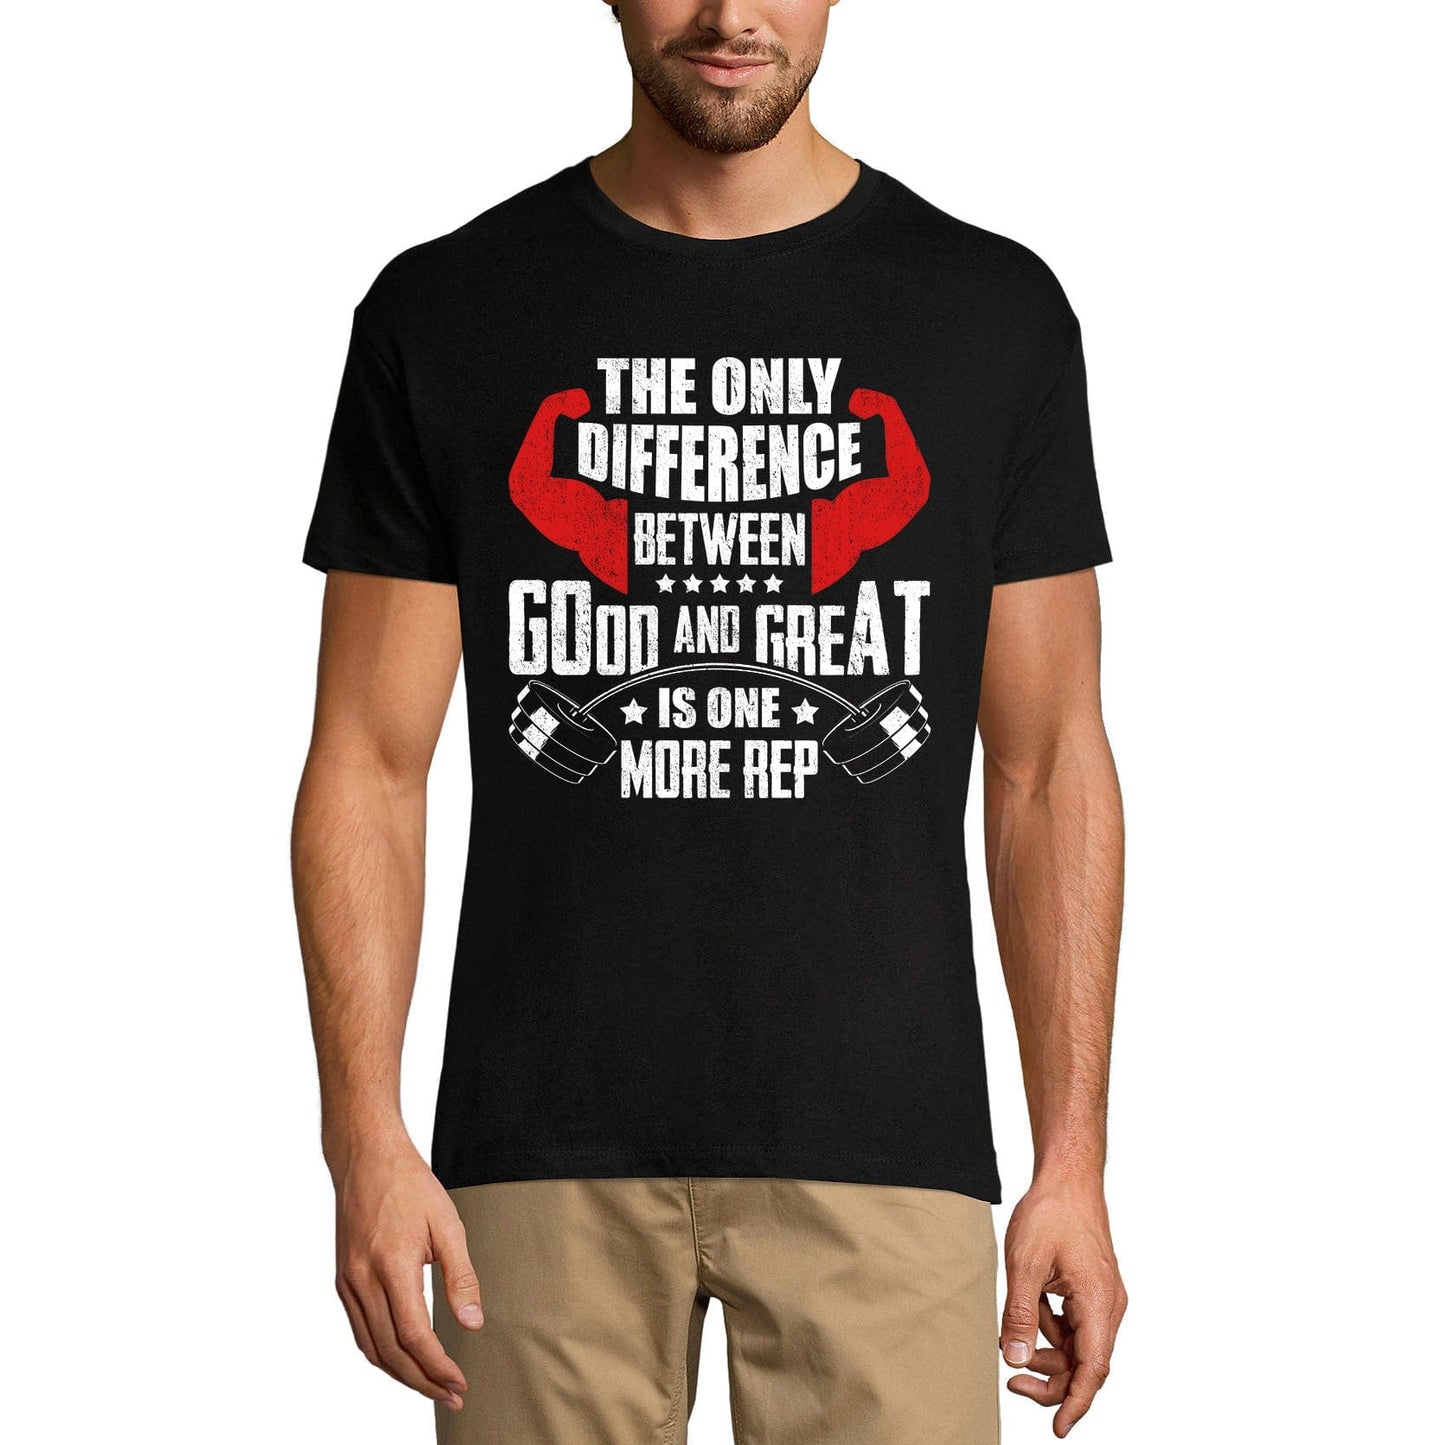 ULTRABASIC Men's Gym T-Shirt Difference Between Good and Great is One More Rep Workout Shirt